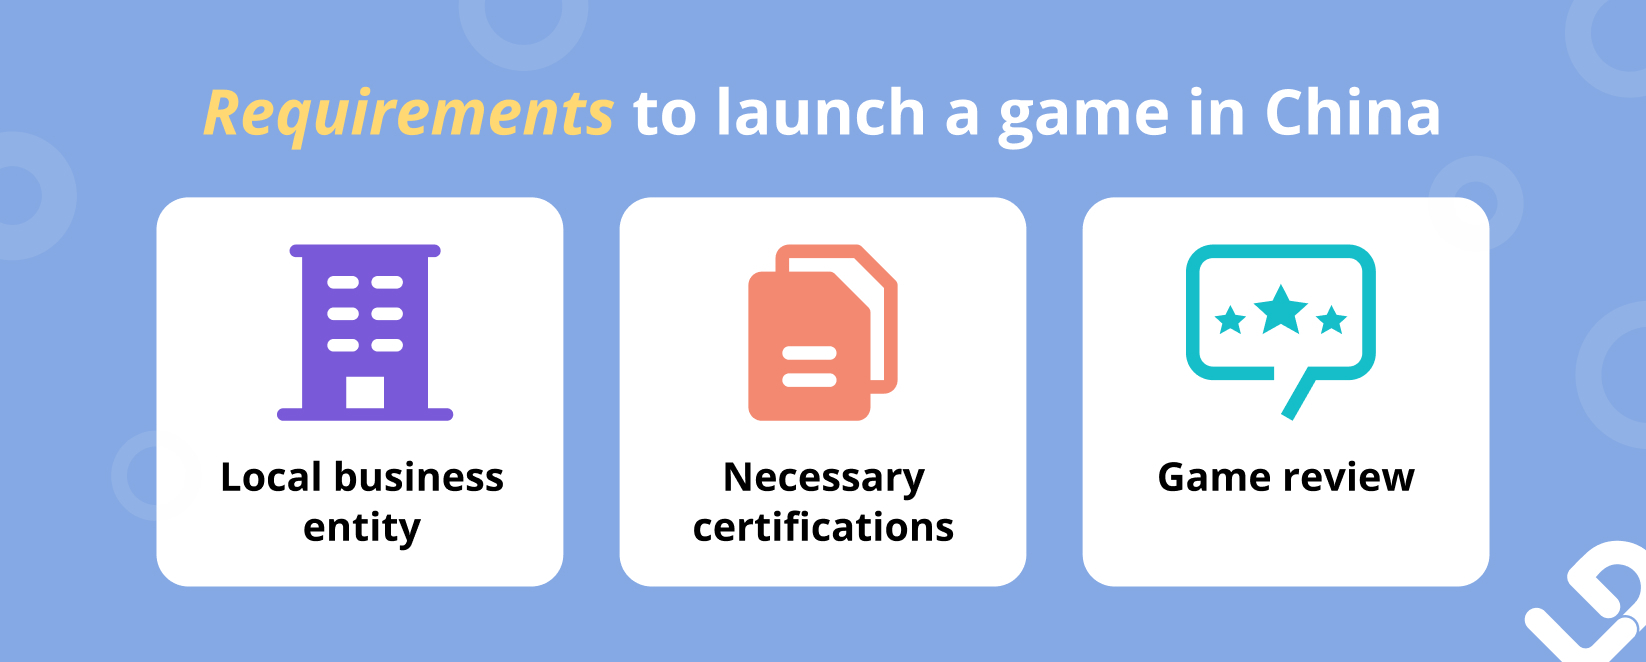 3 major requirements to launch a game in China